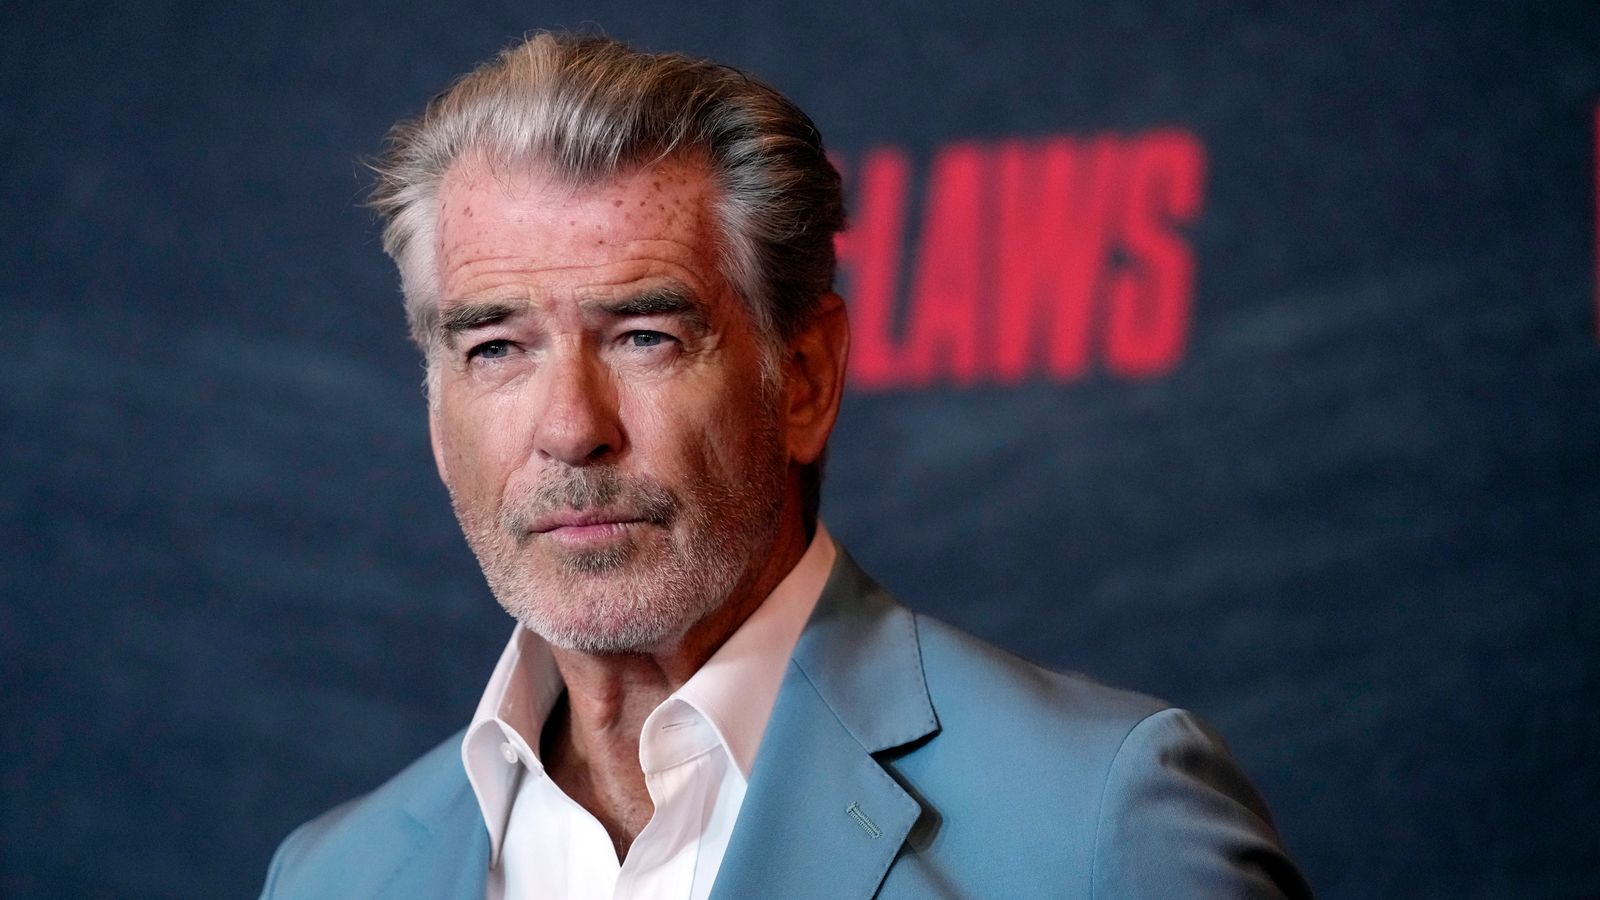 Pierce Brosnan 'deeply regrets' walking off trail in Yellowstone National Park as court fines actor